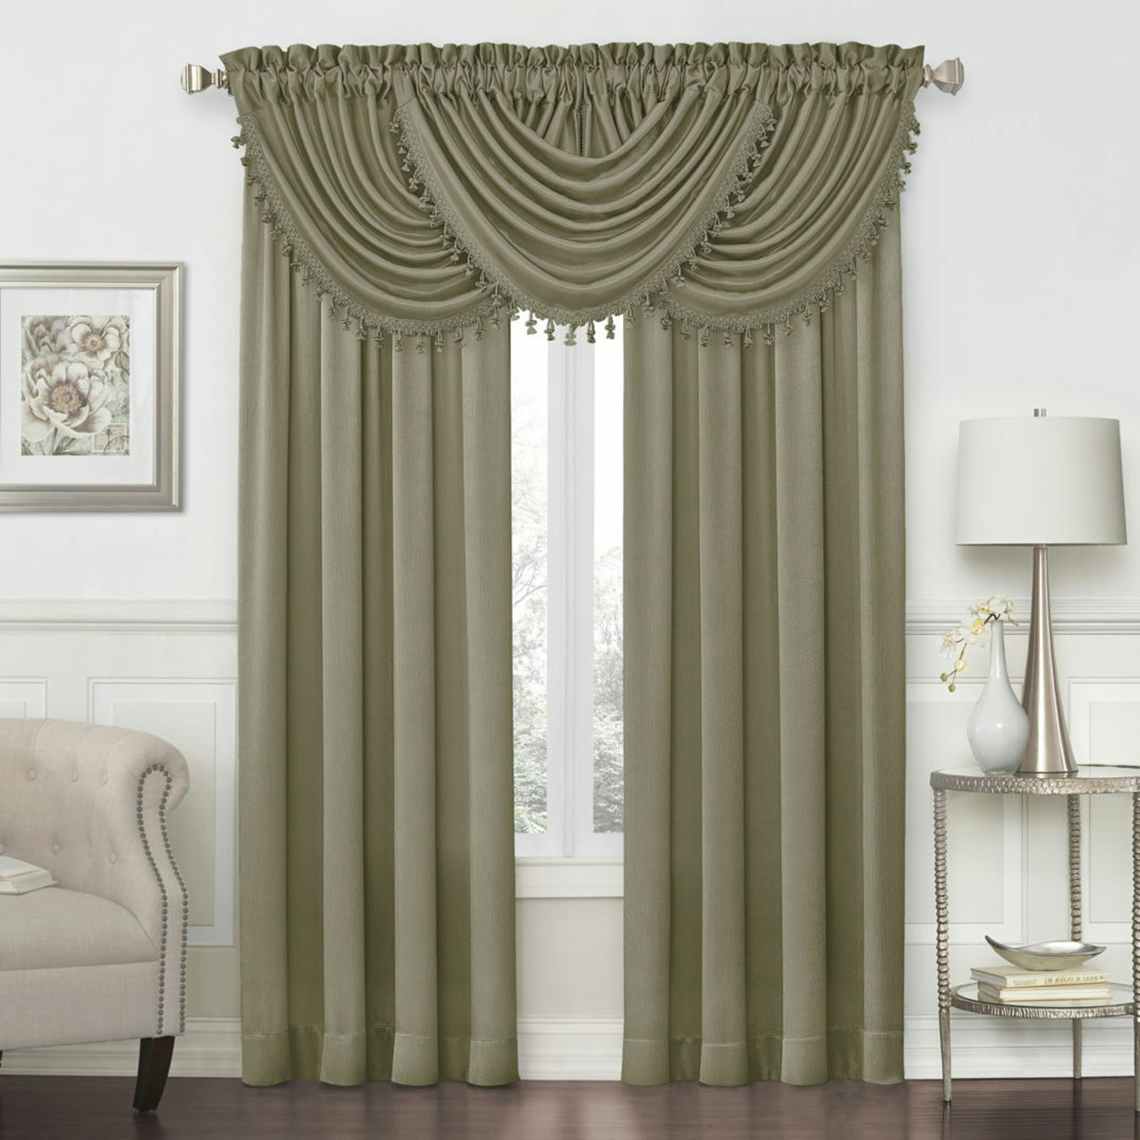 Olive green window curtains with valance